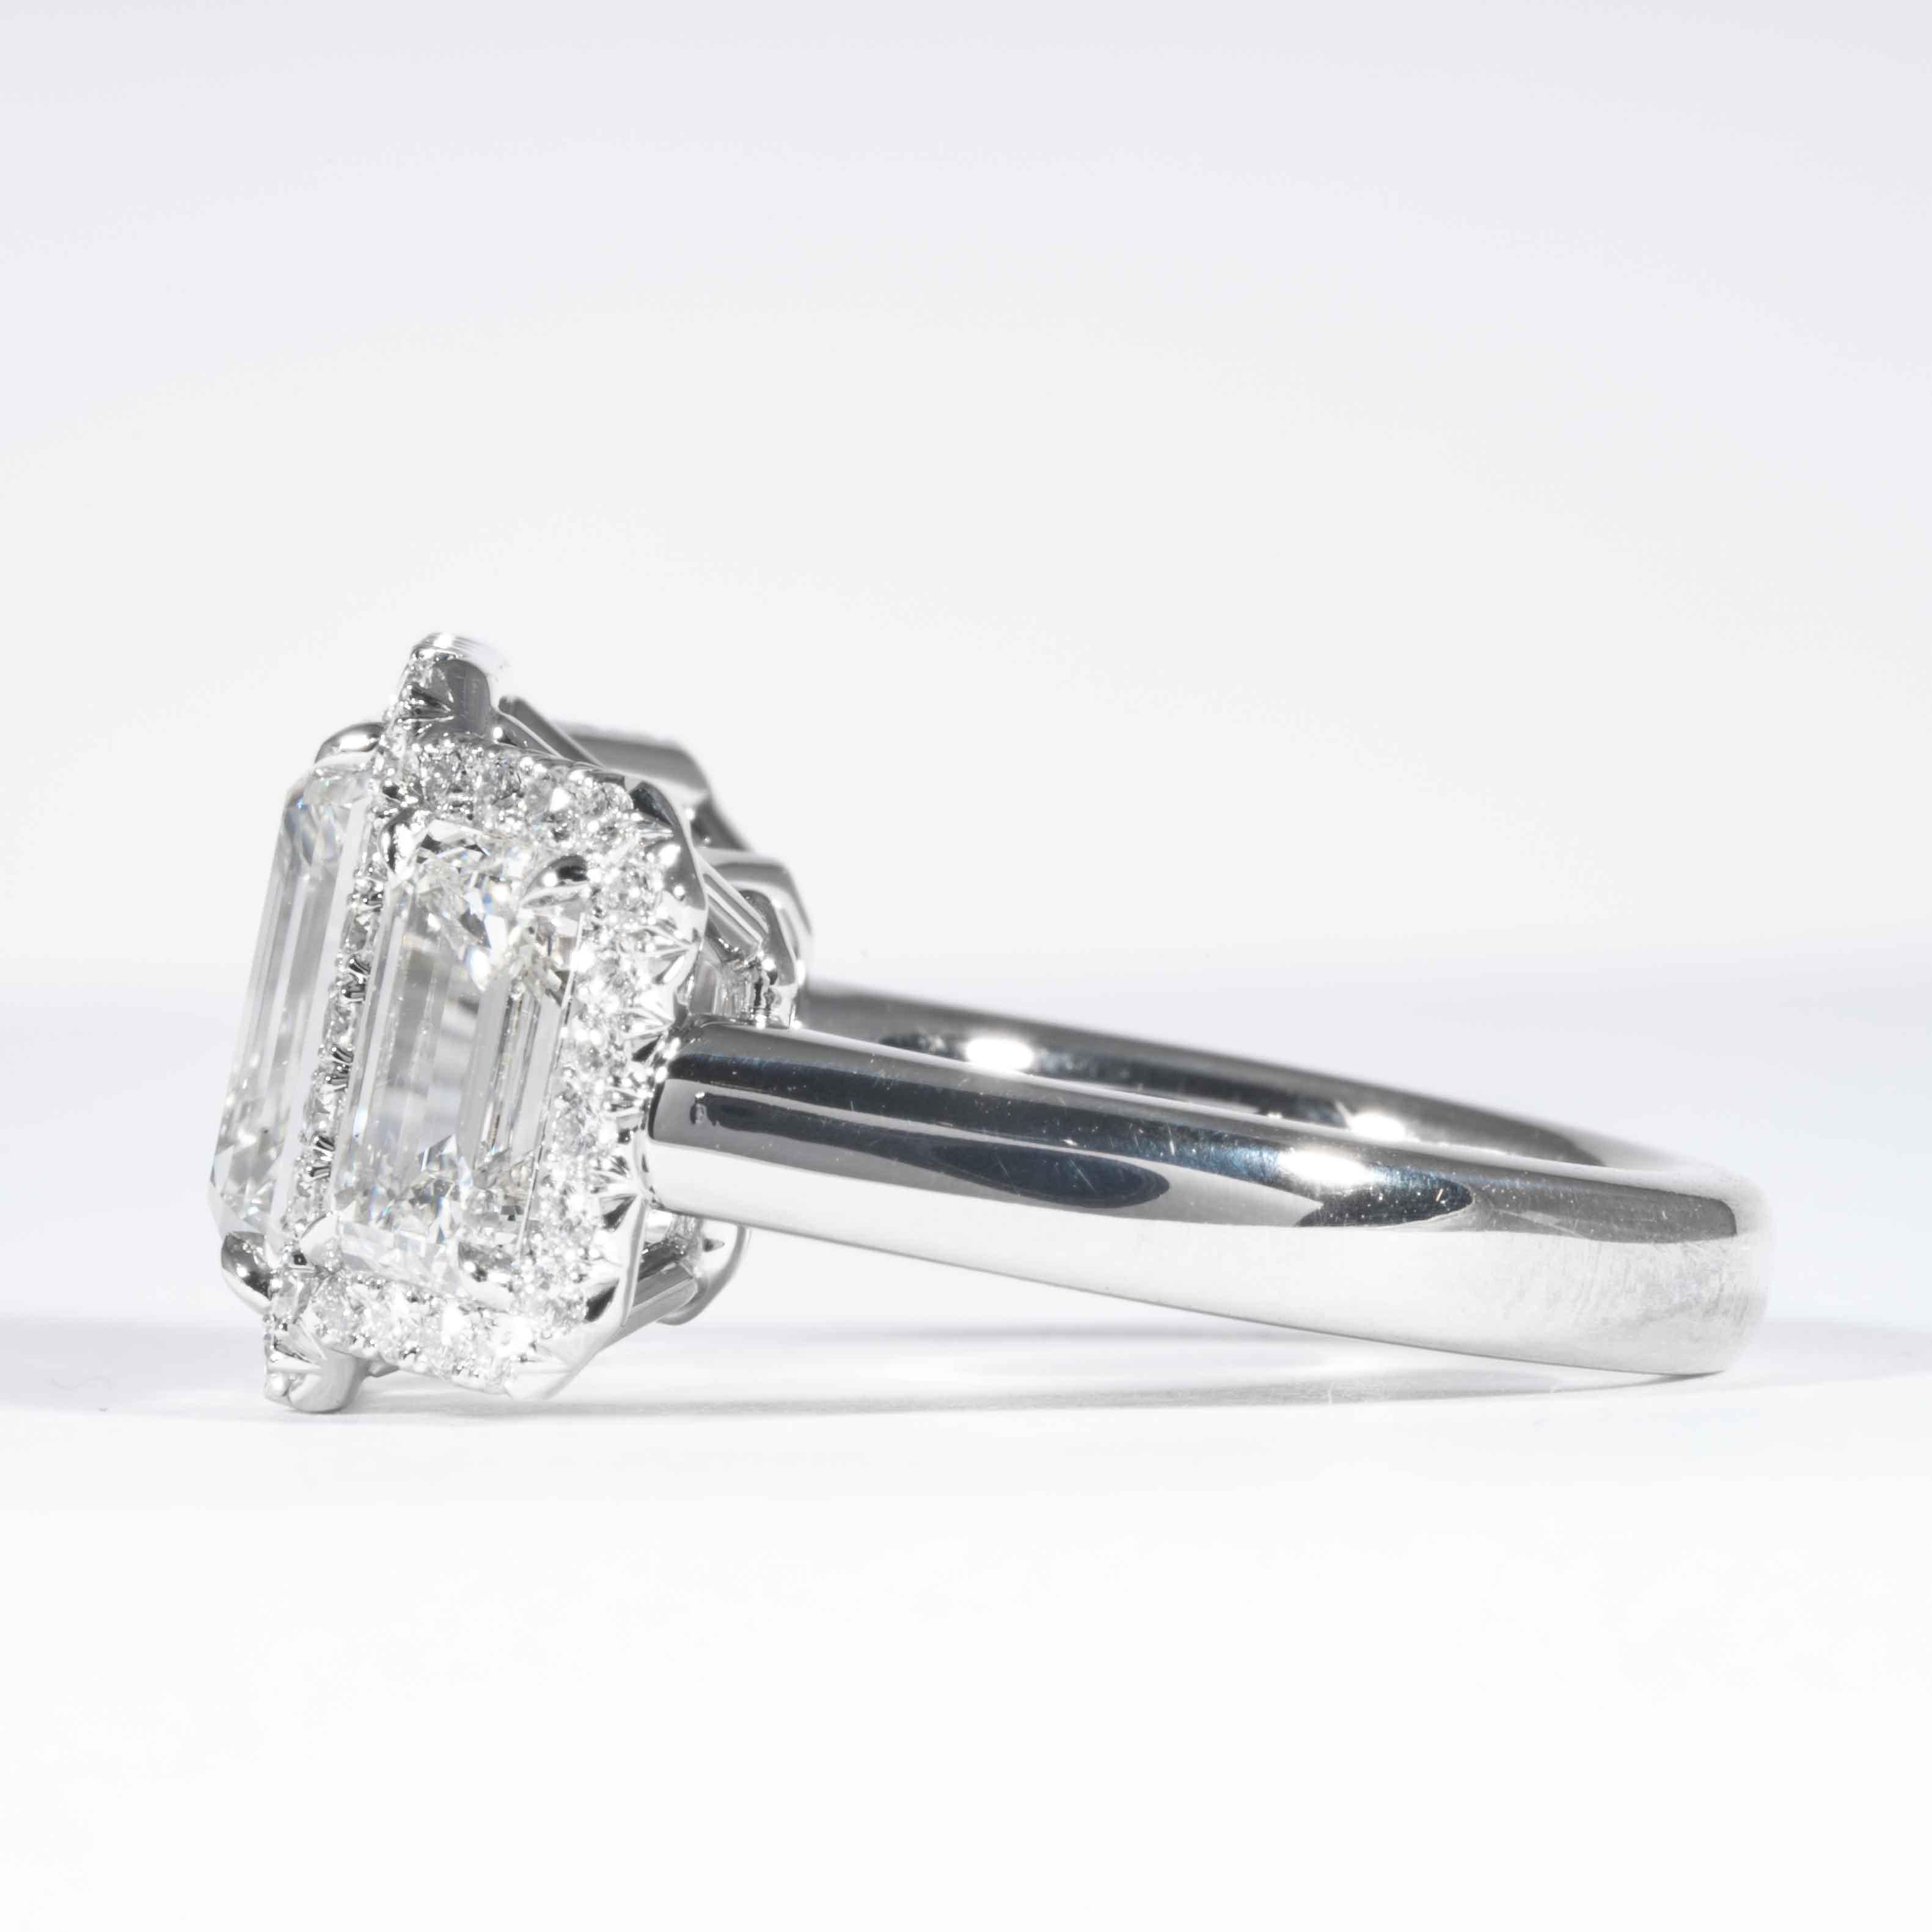 Shreve, Crump & Low GIA Certified 3.23 Carat G SI1 Emerald Cut Diamond Ring In New Condition For Sale In Boston, MA